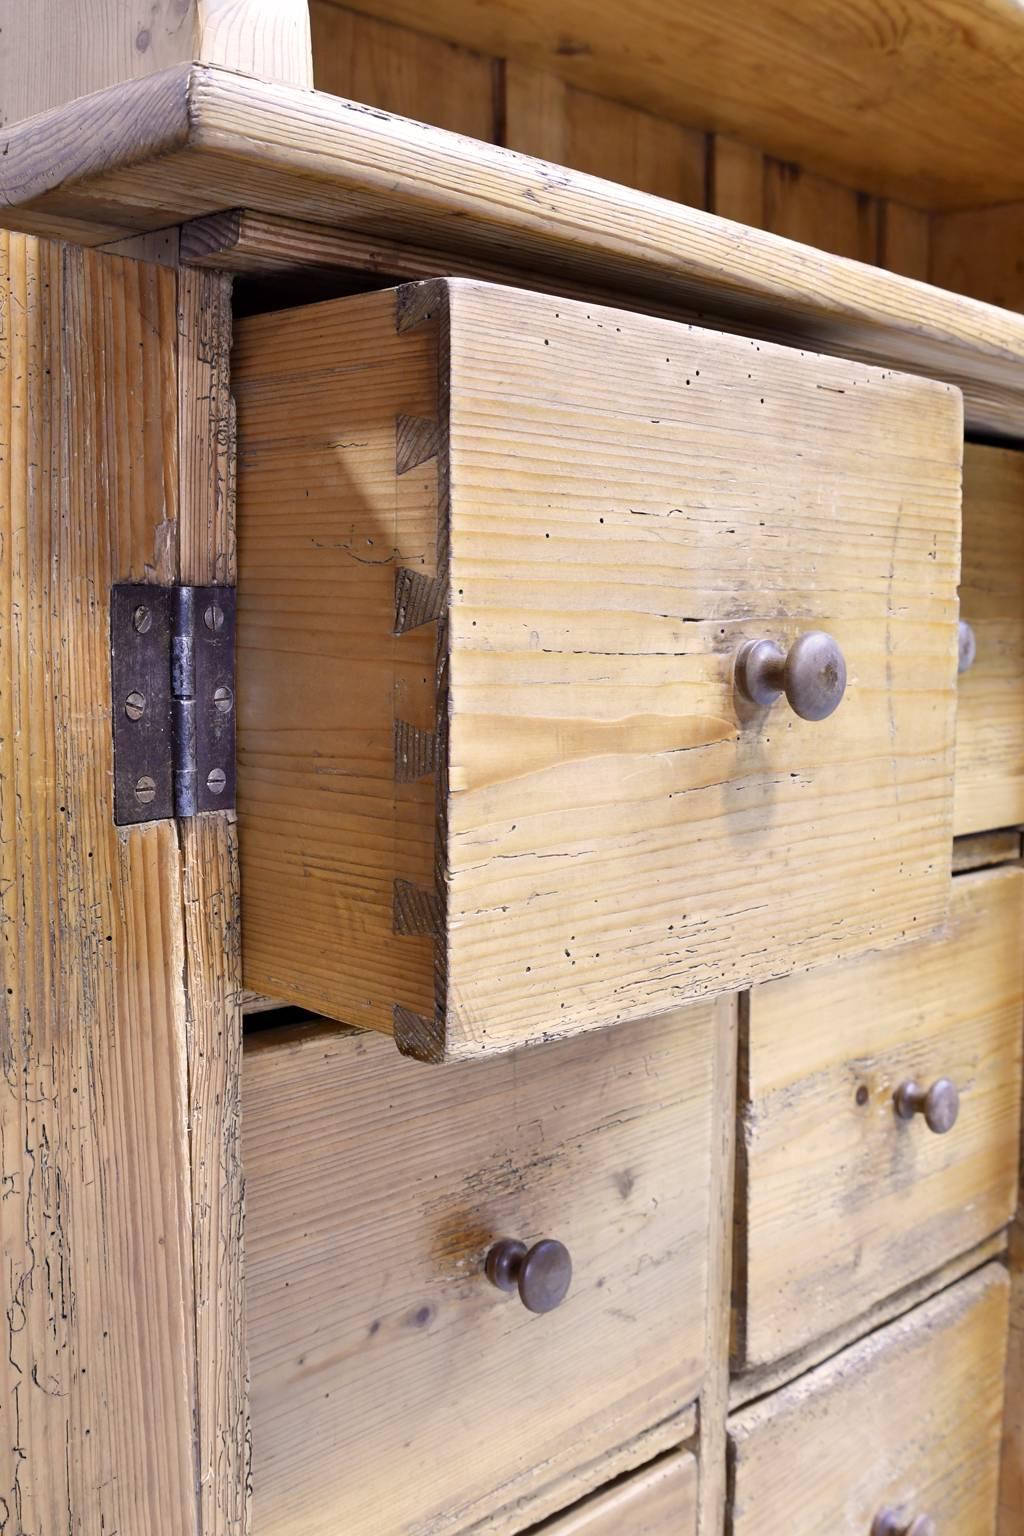 hutch with drawers